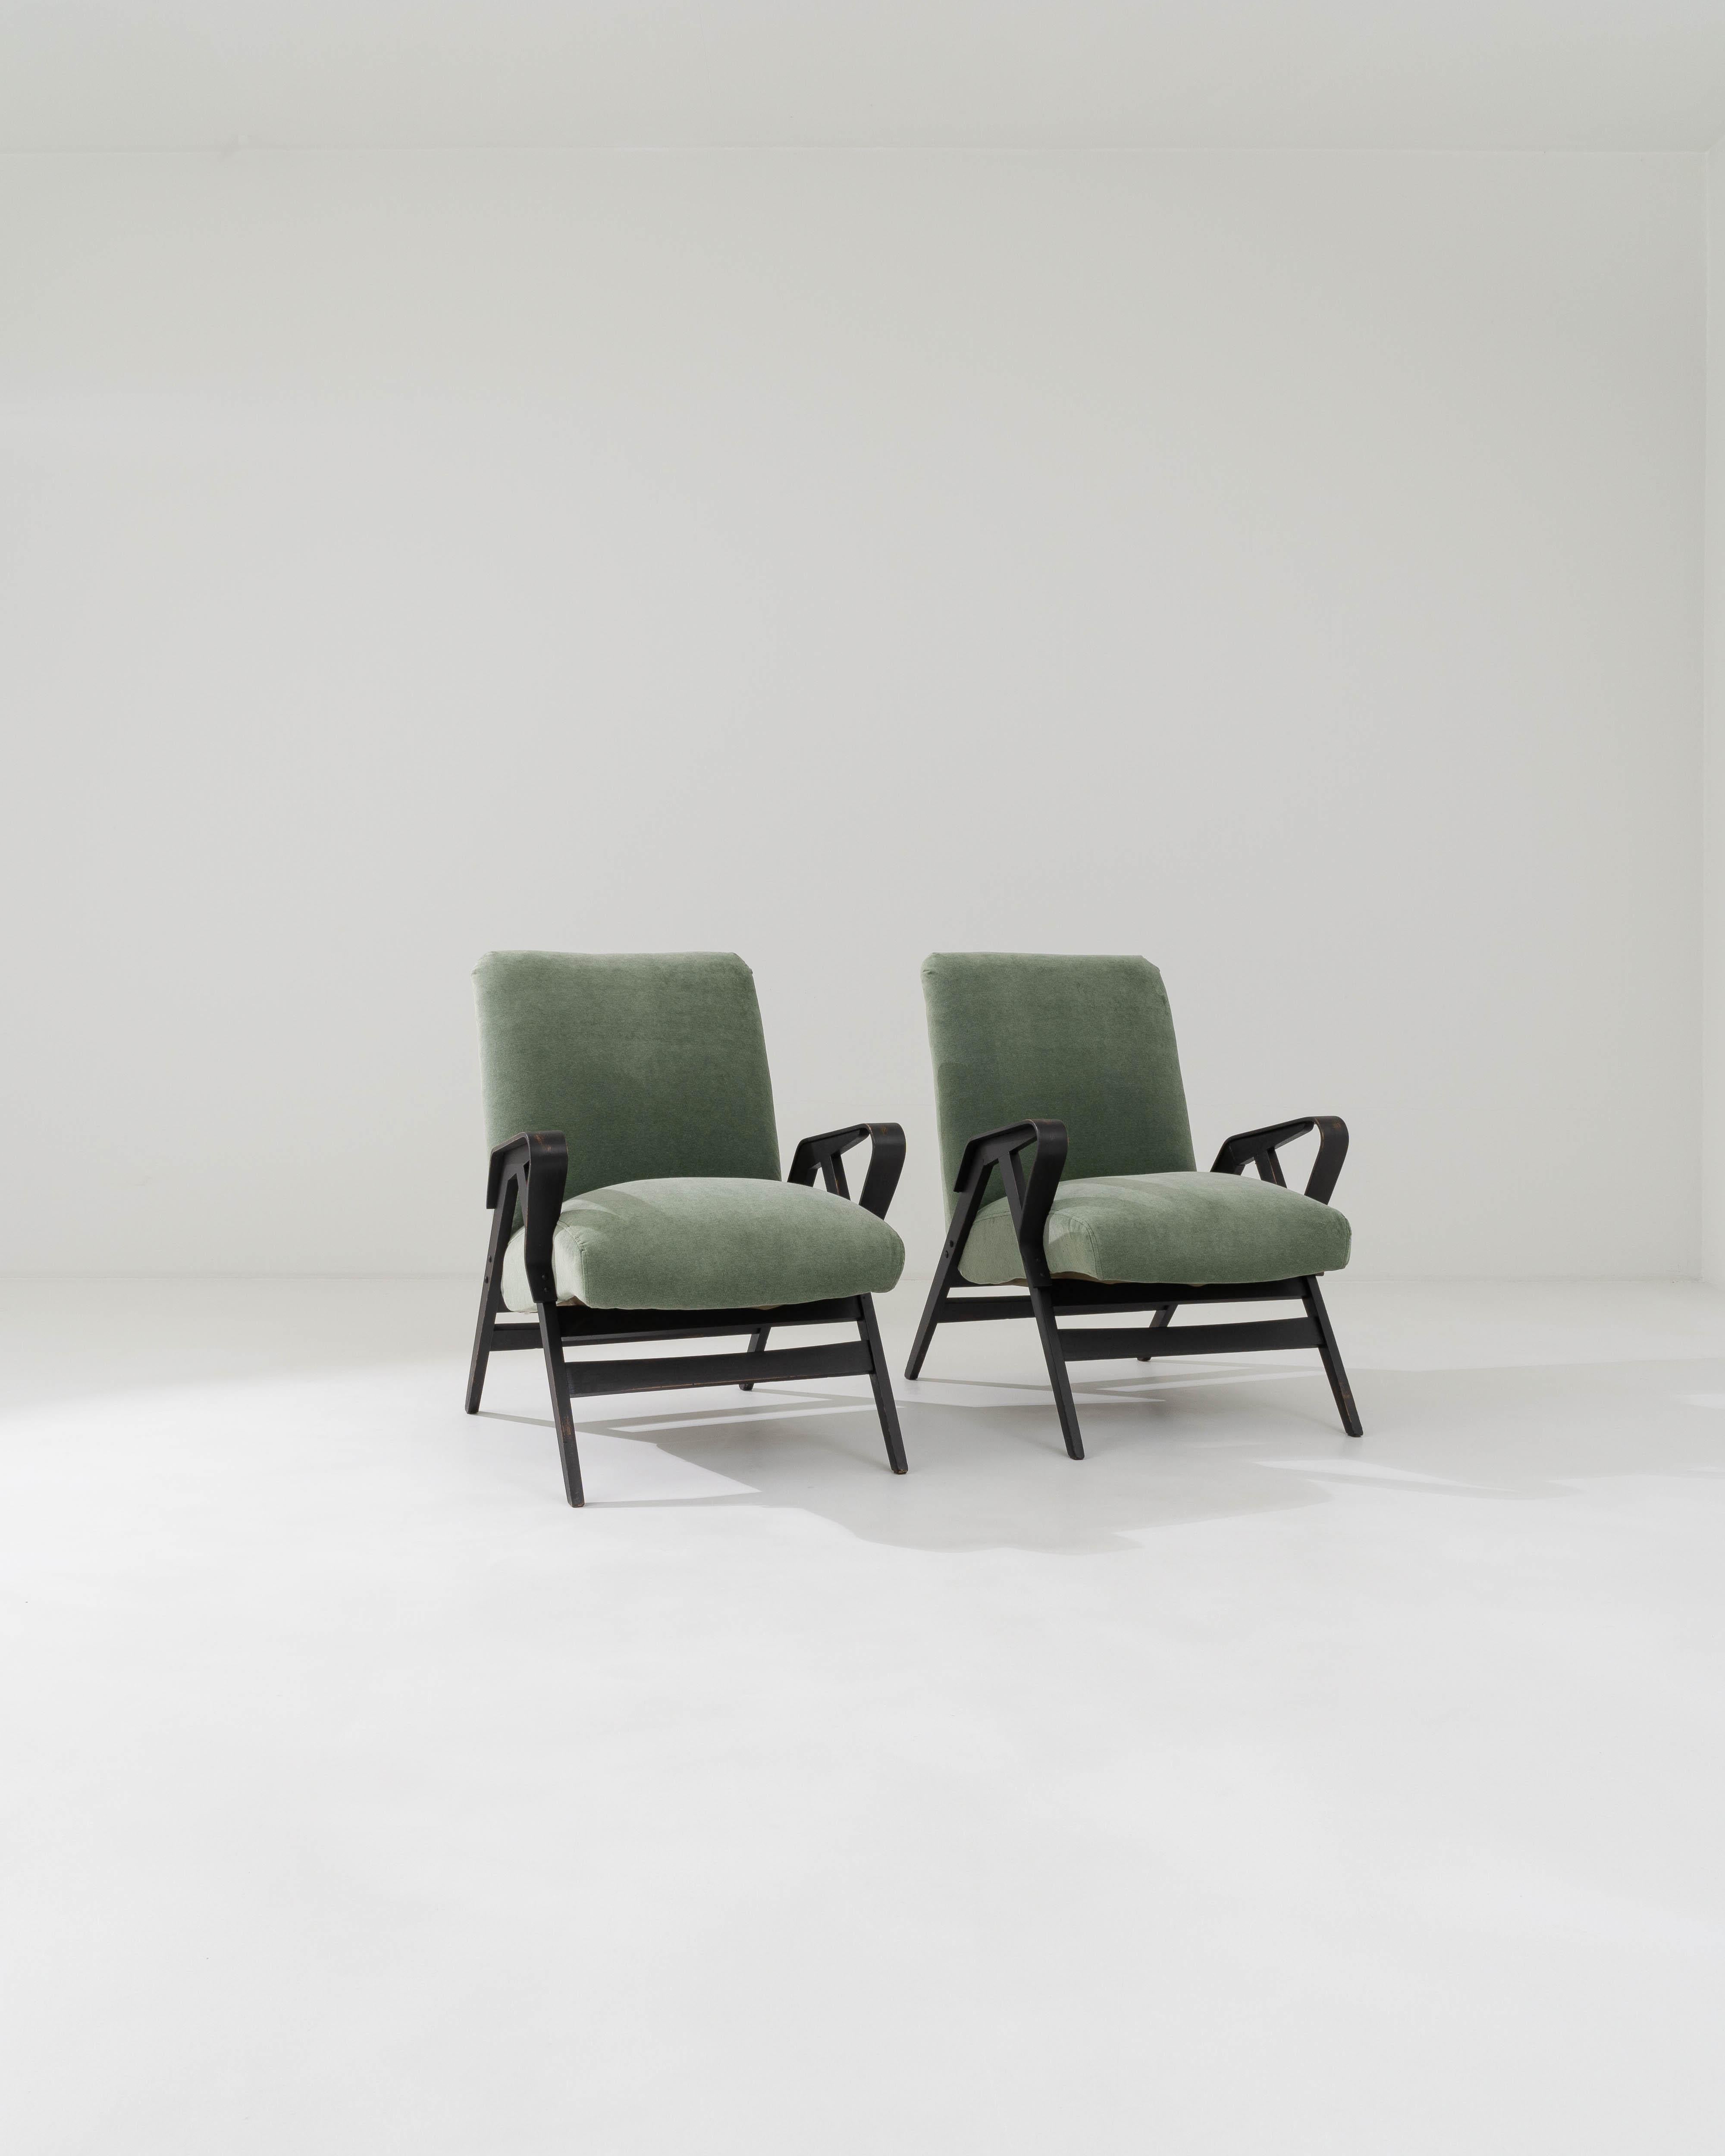 Characterized by the clean lines that define their minimalist silhouette, these armchairs were crafted by the iconic Czech brand, with the design attributed to František Jirák, in the 1960s. The smooth, contoured surfaces of the bentwood arms engage